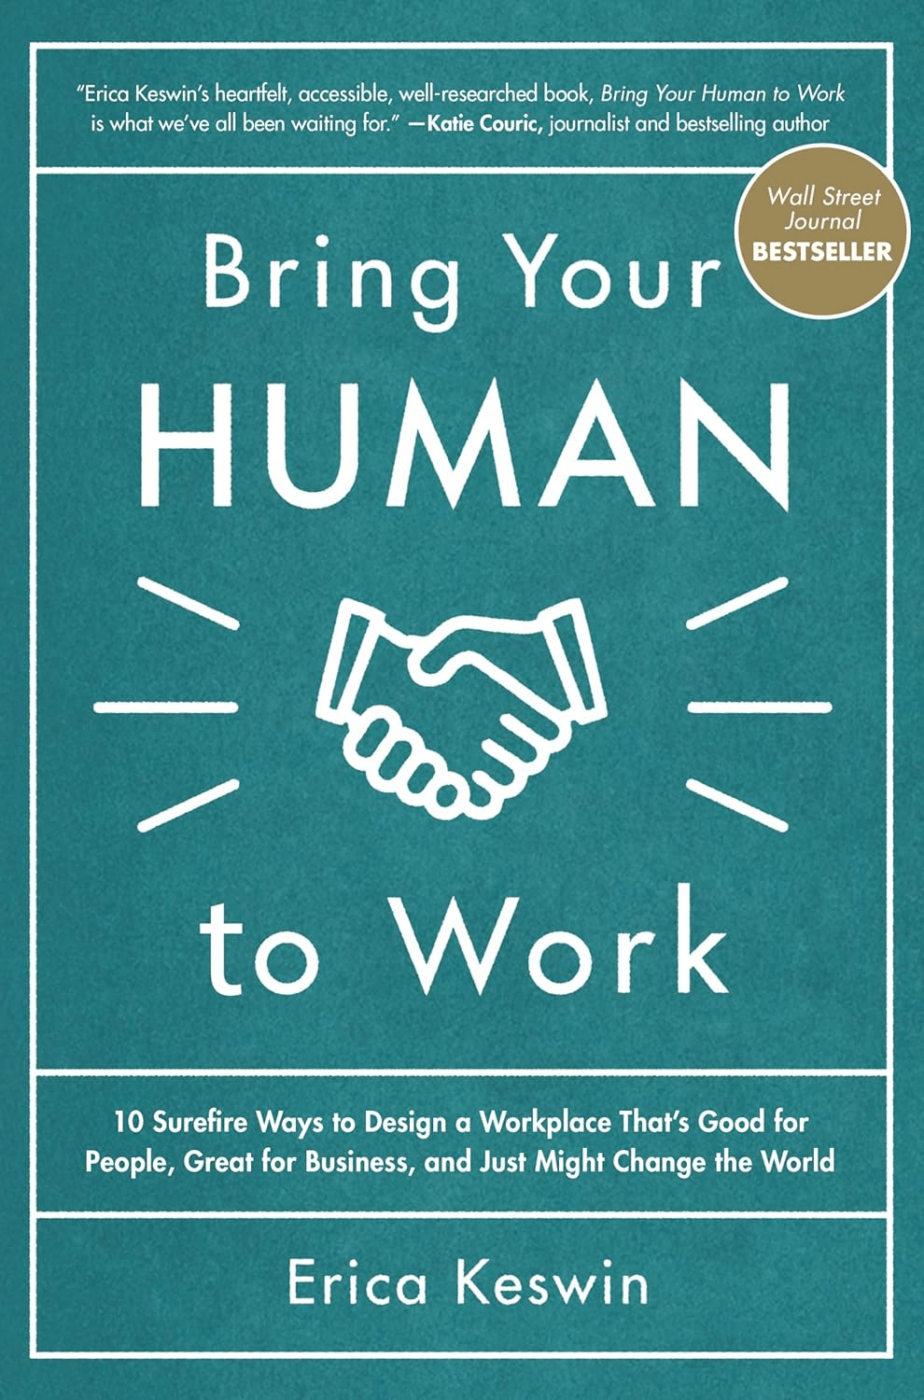 Bring Your Human To Work by Erica Keswin